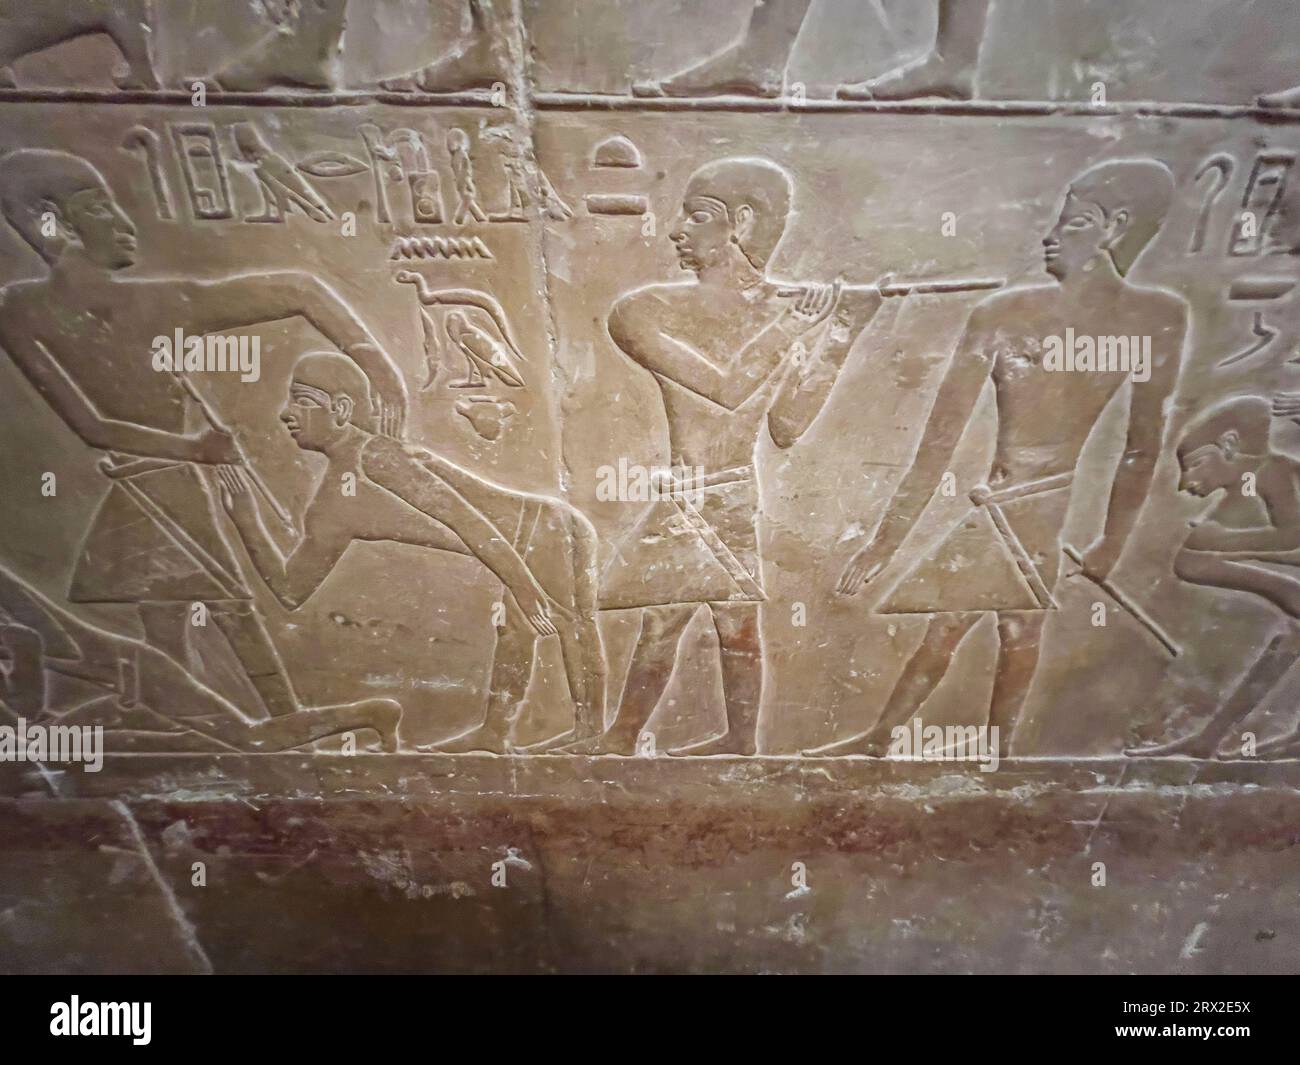 Relief from a tomb in Saqqara, part of the Memphite Necropolis, UNESCO World Heritage Site, Egypt, North Africa Africa Stock Photo